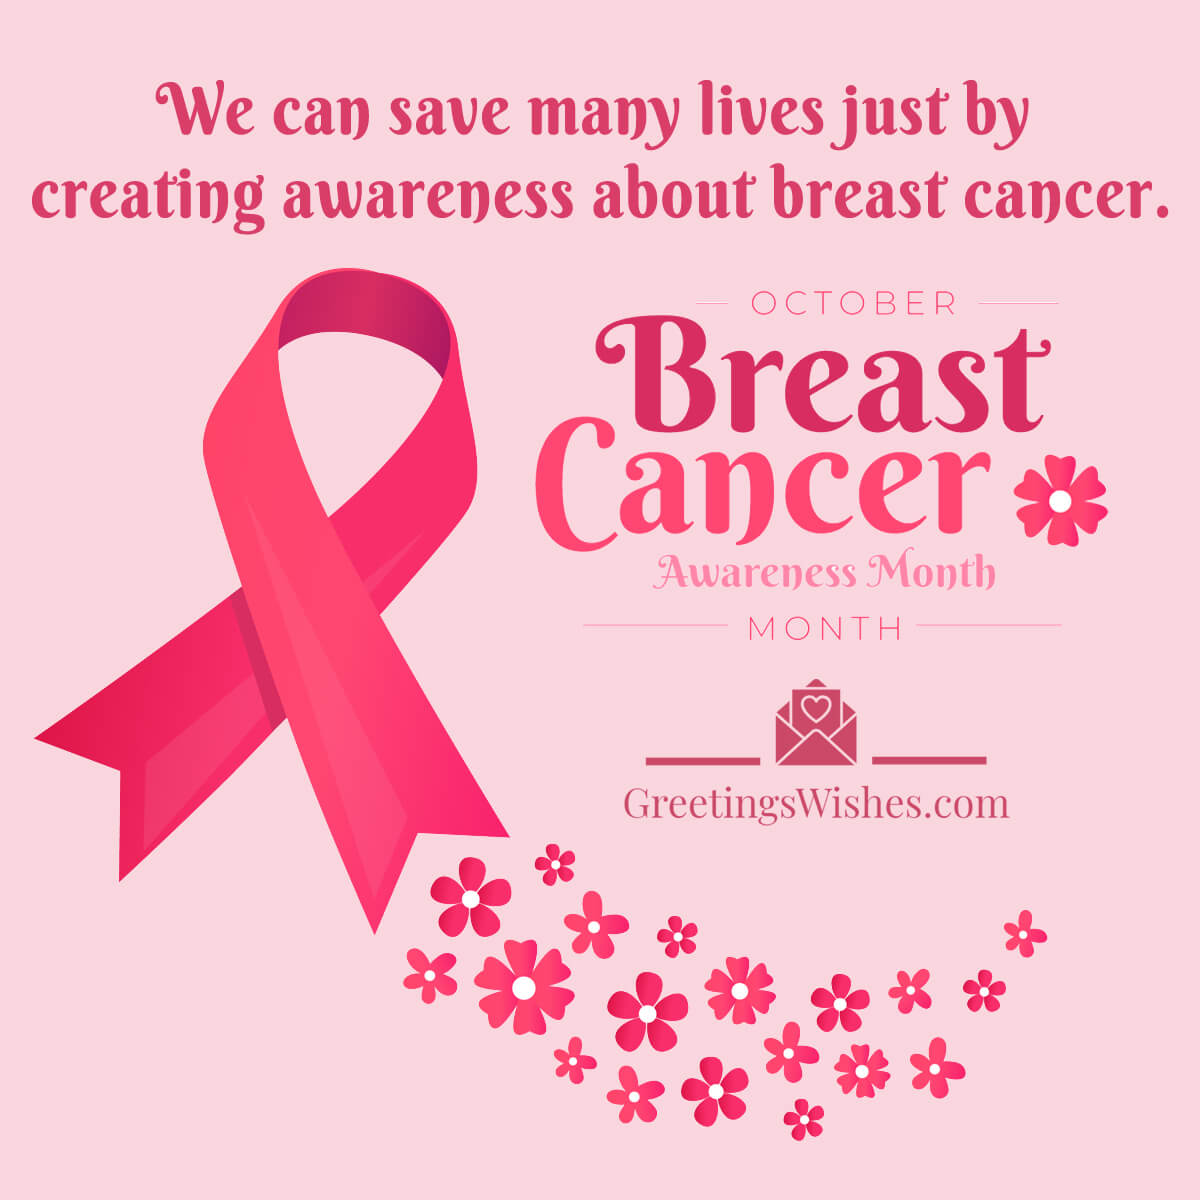 World Breast Cancer Day Wishes (19th October) - Greetings Wishes